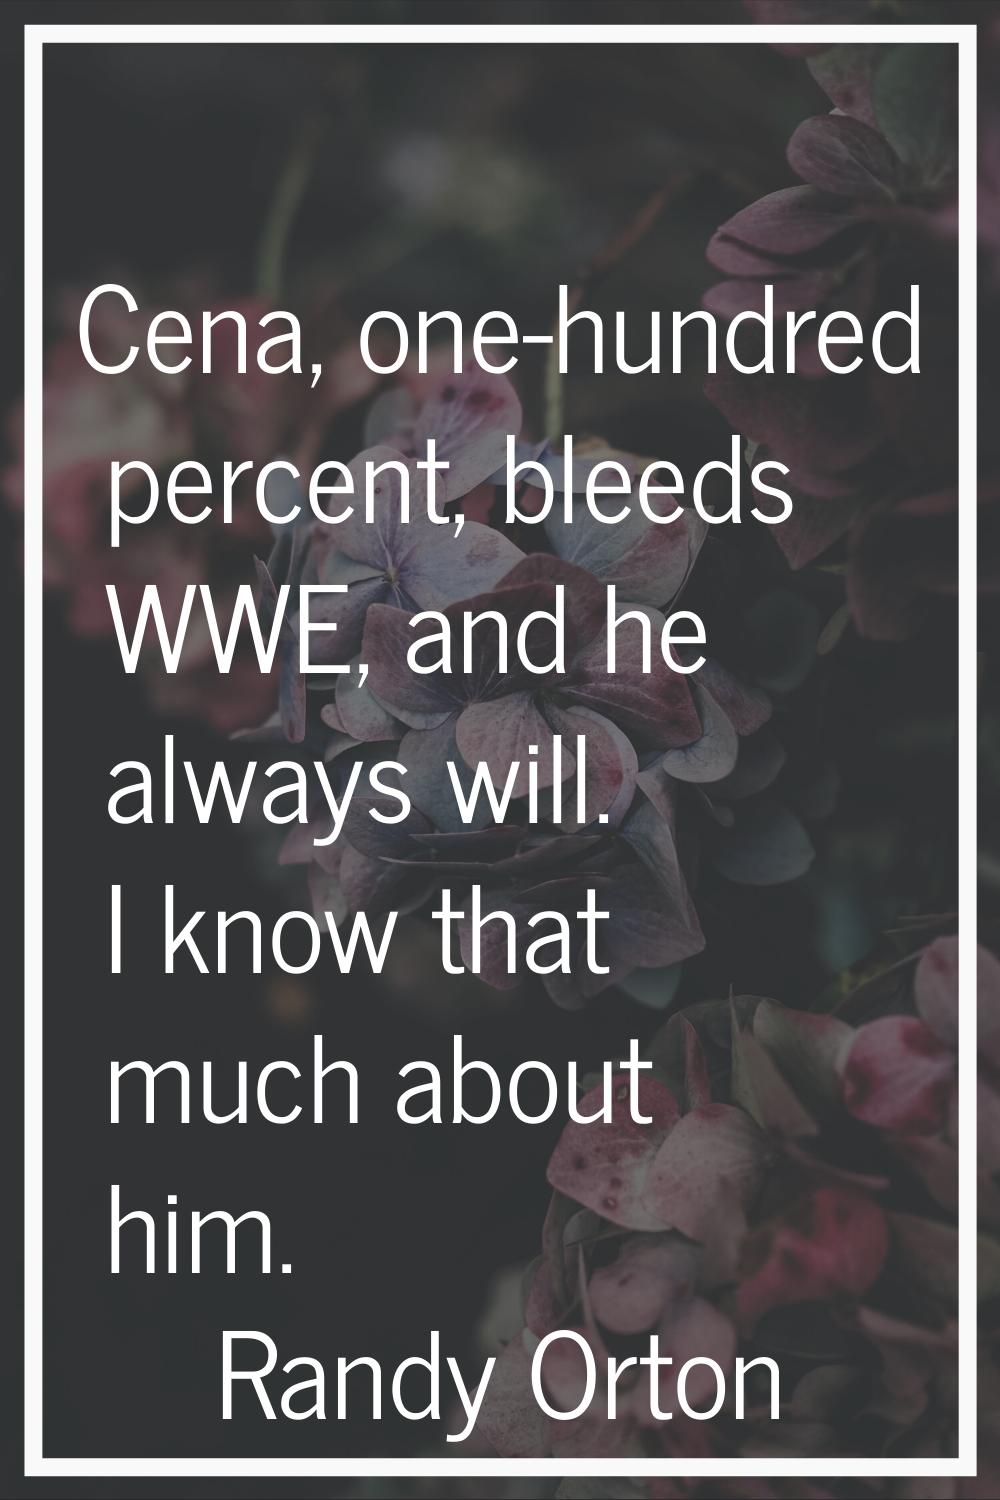 Cena, one-hundred percent, bleeds WWE, and he always will. I know that much about him.